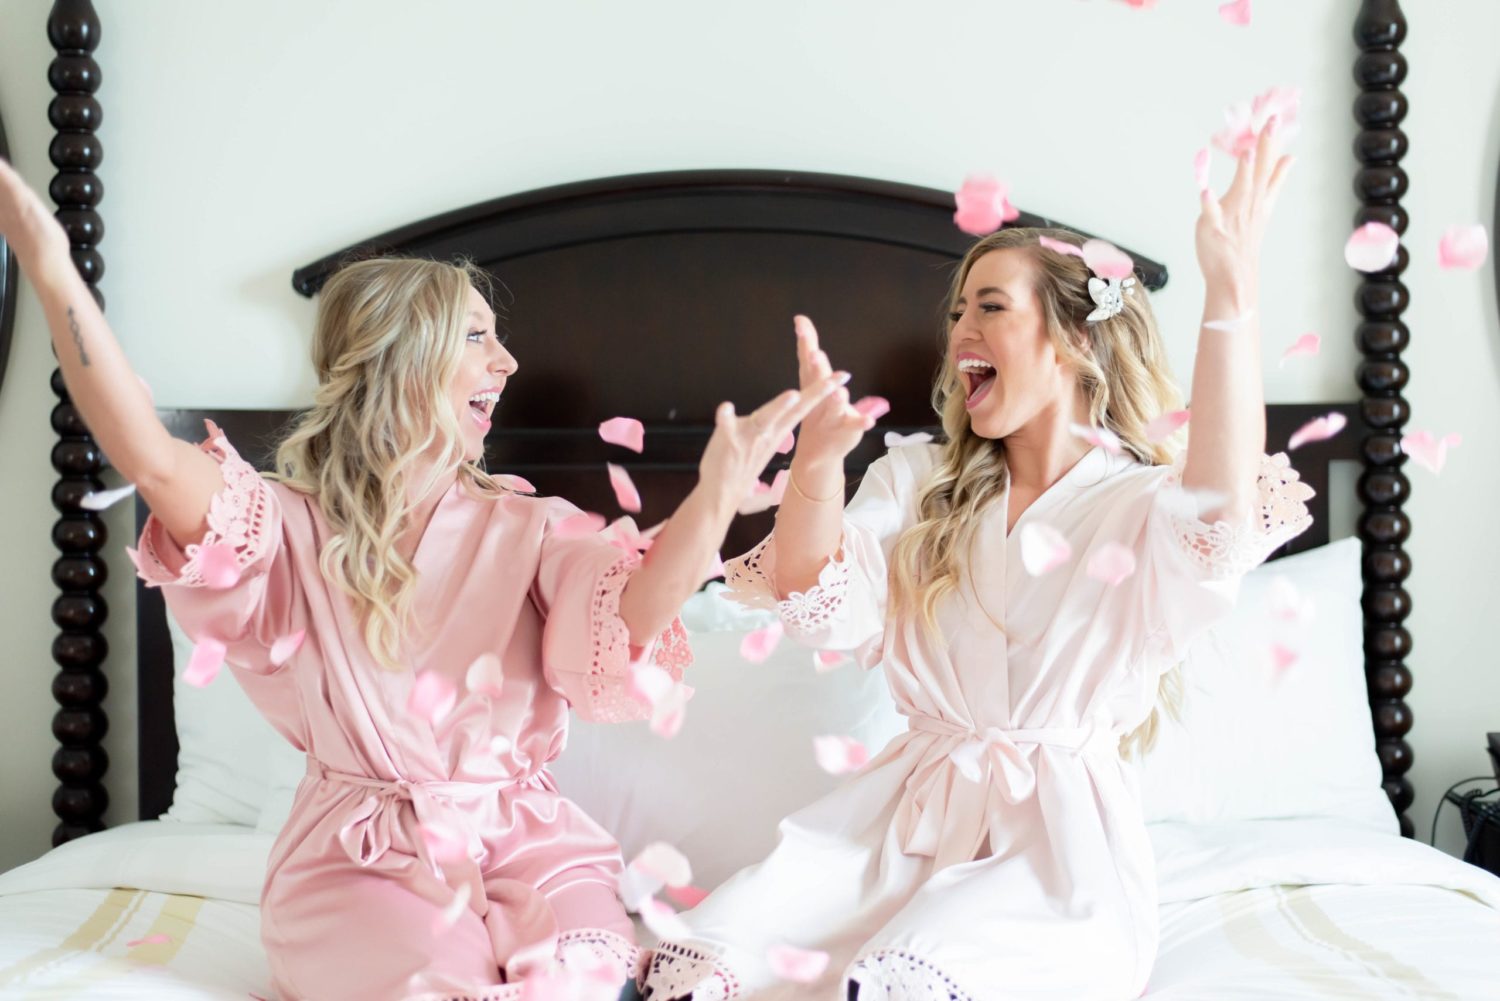 bride and maid of honor throwing flower petals on the wedding day at hotel room